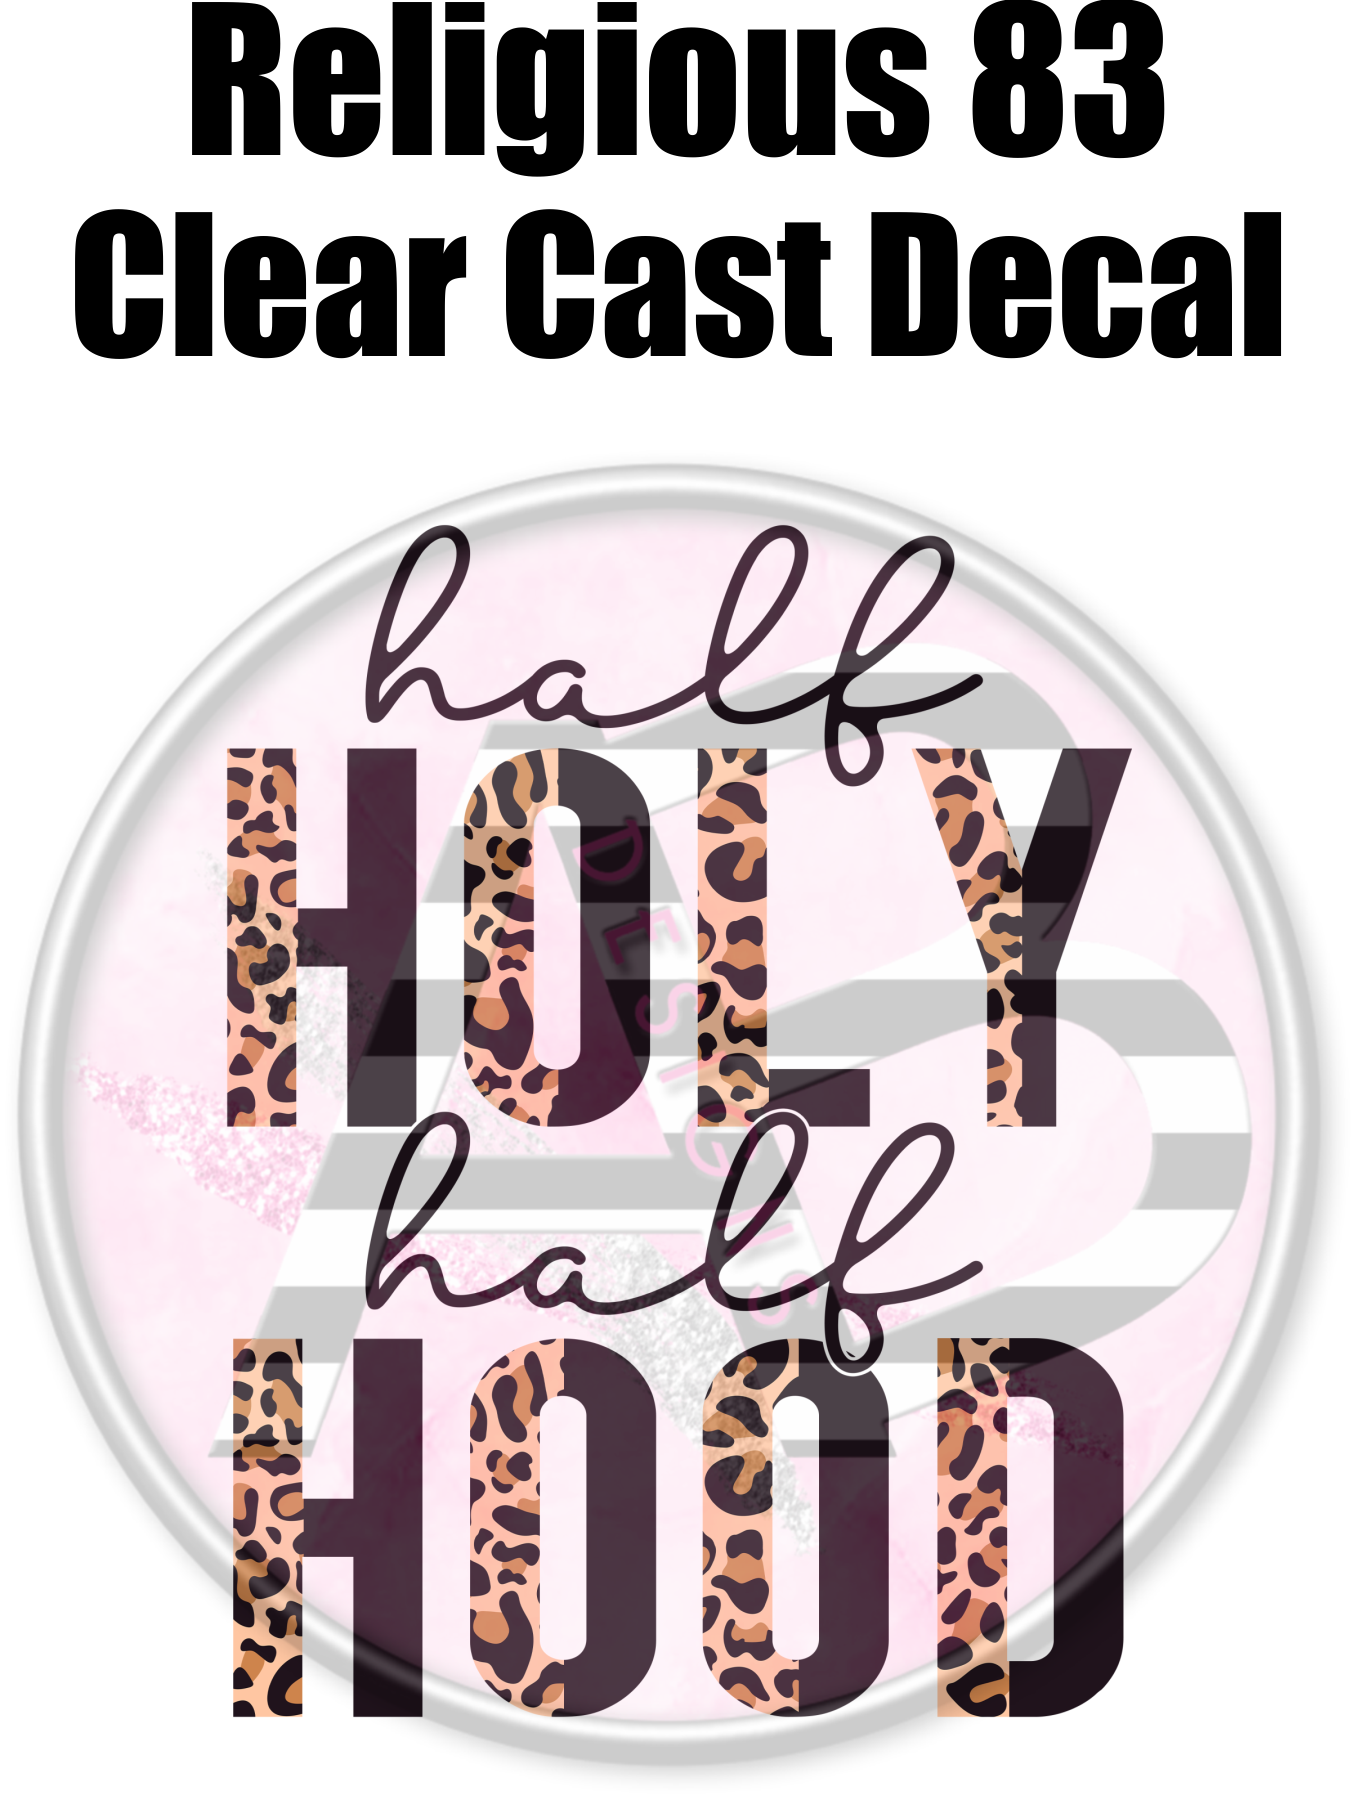 Religious 83 - Clear Cast Decal - 239